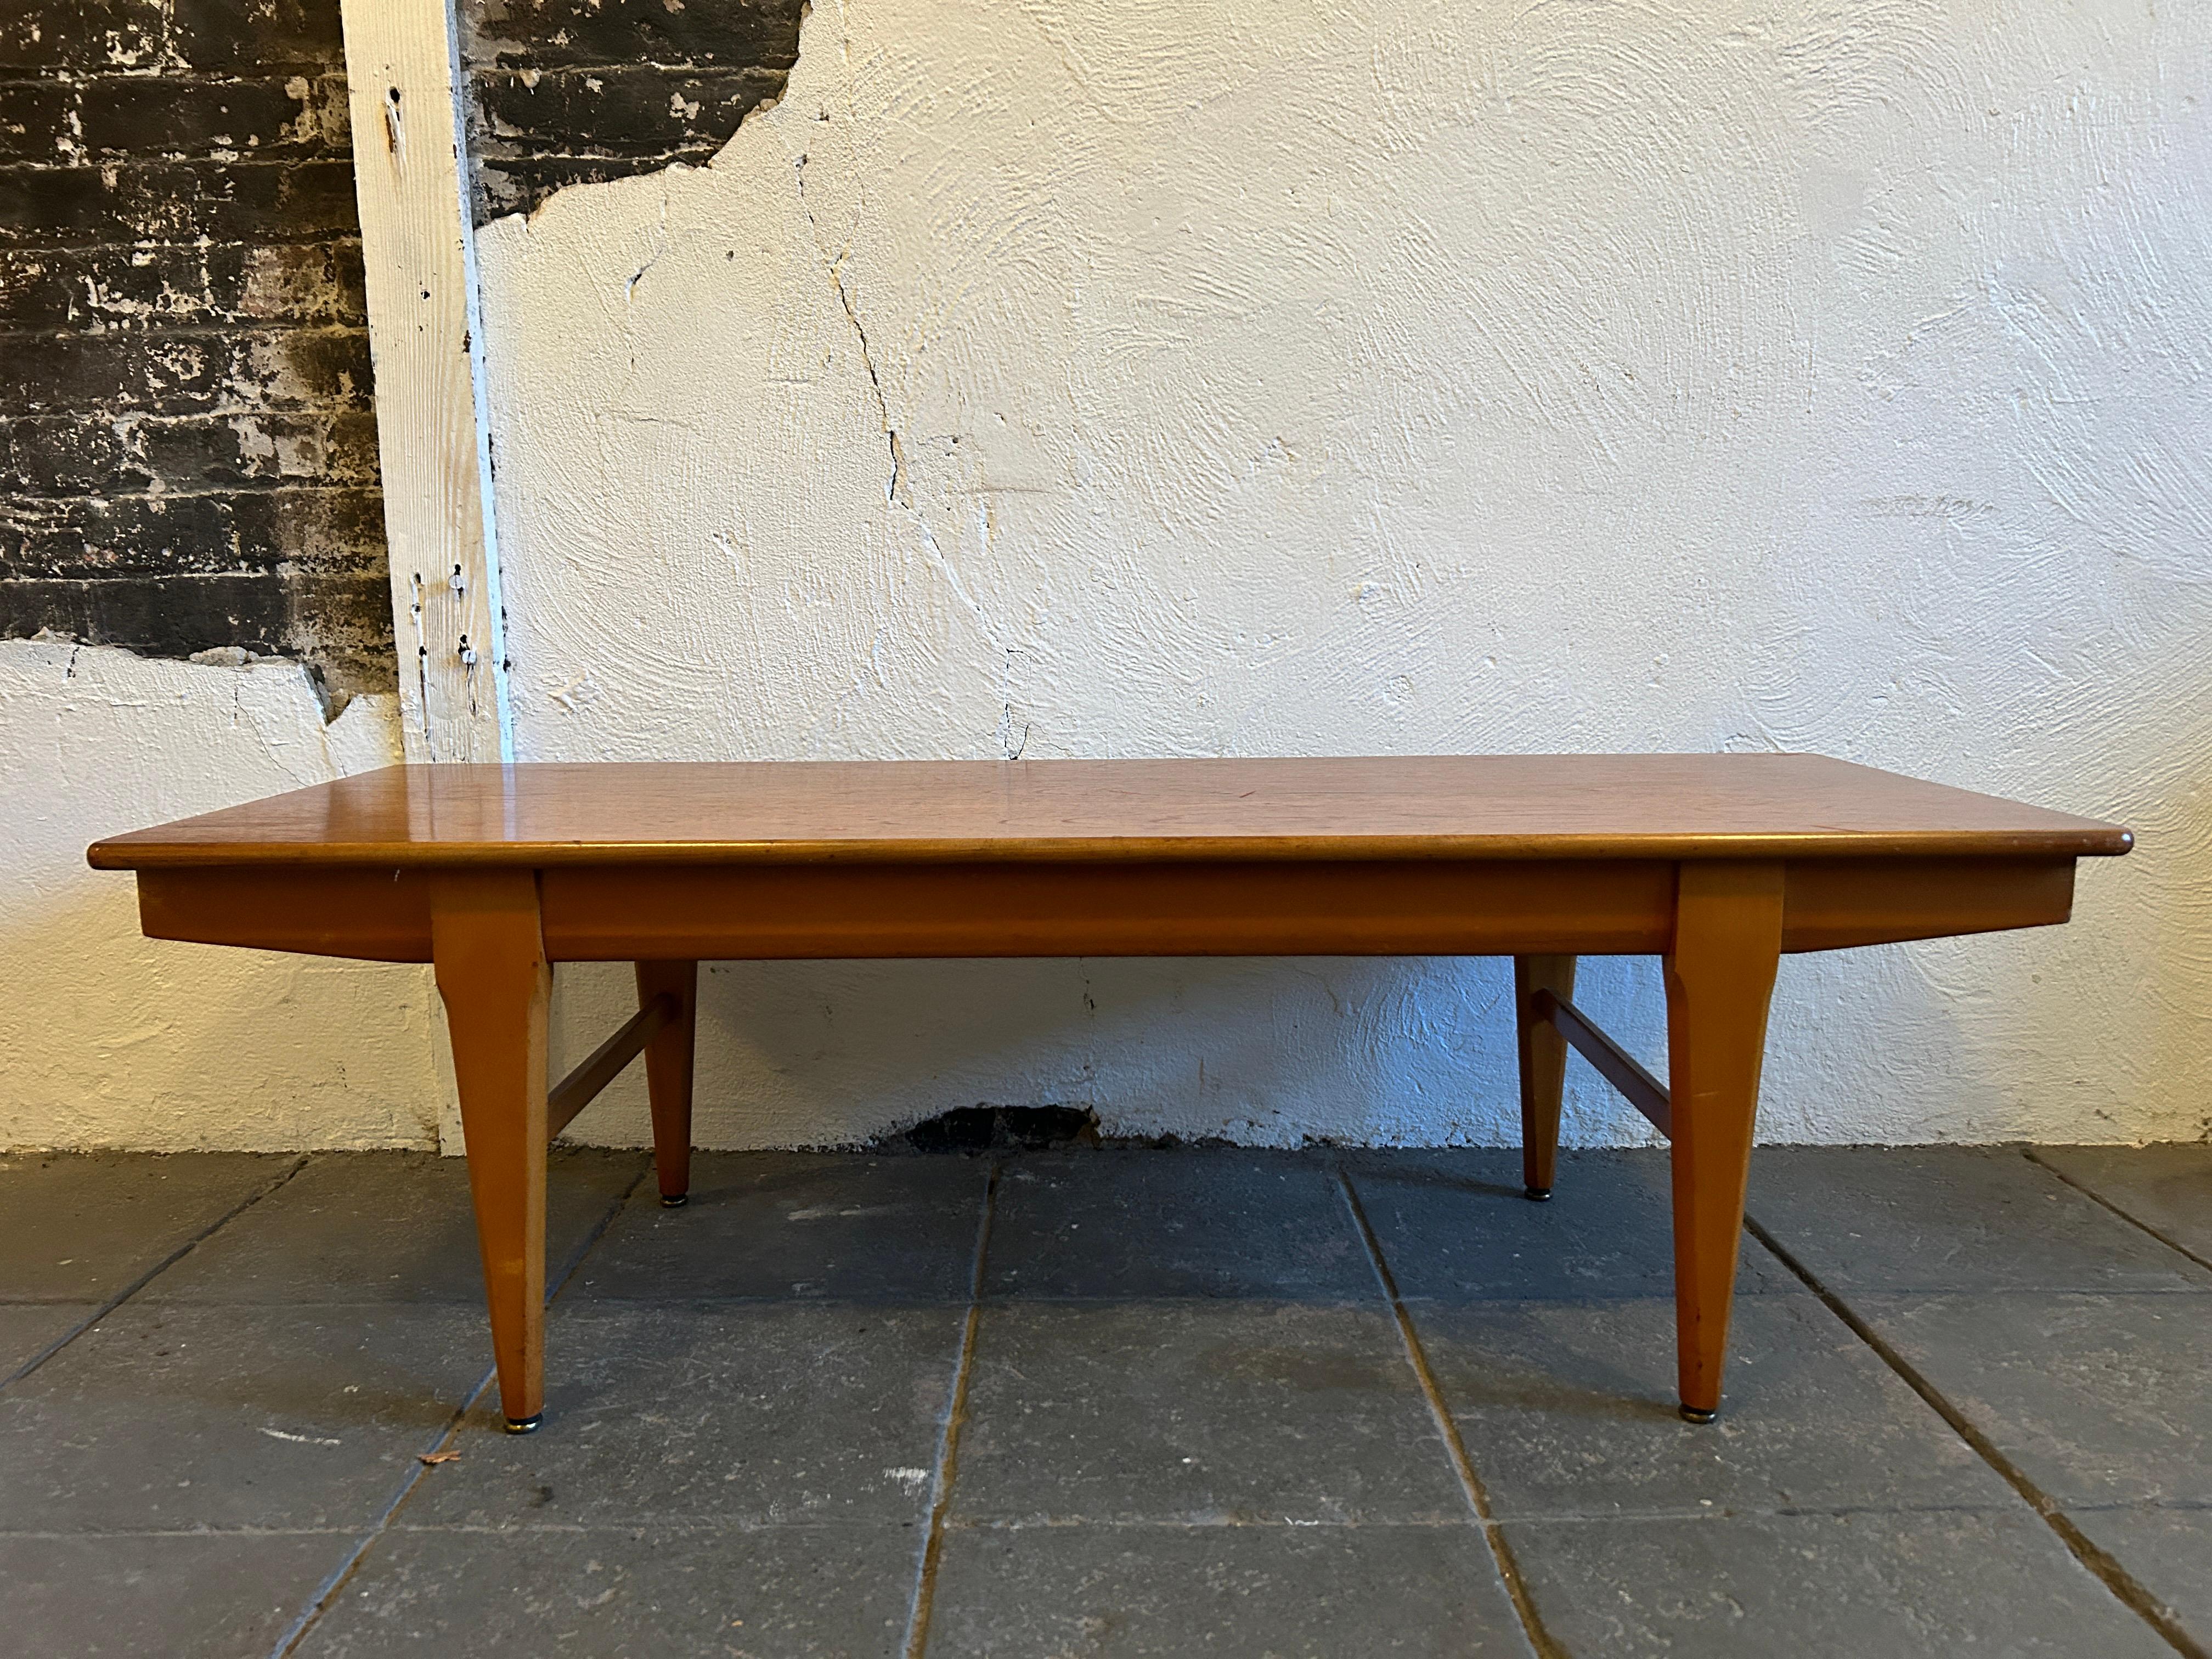 Danish modern Teak coffee table. Very simple design. Good vintage condition. Made in Denmark. Located in Brooklyn NYC.

Measures 48